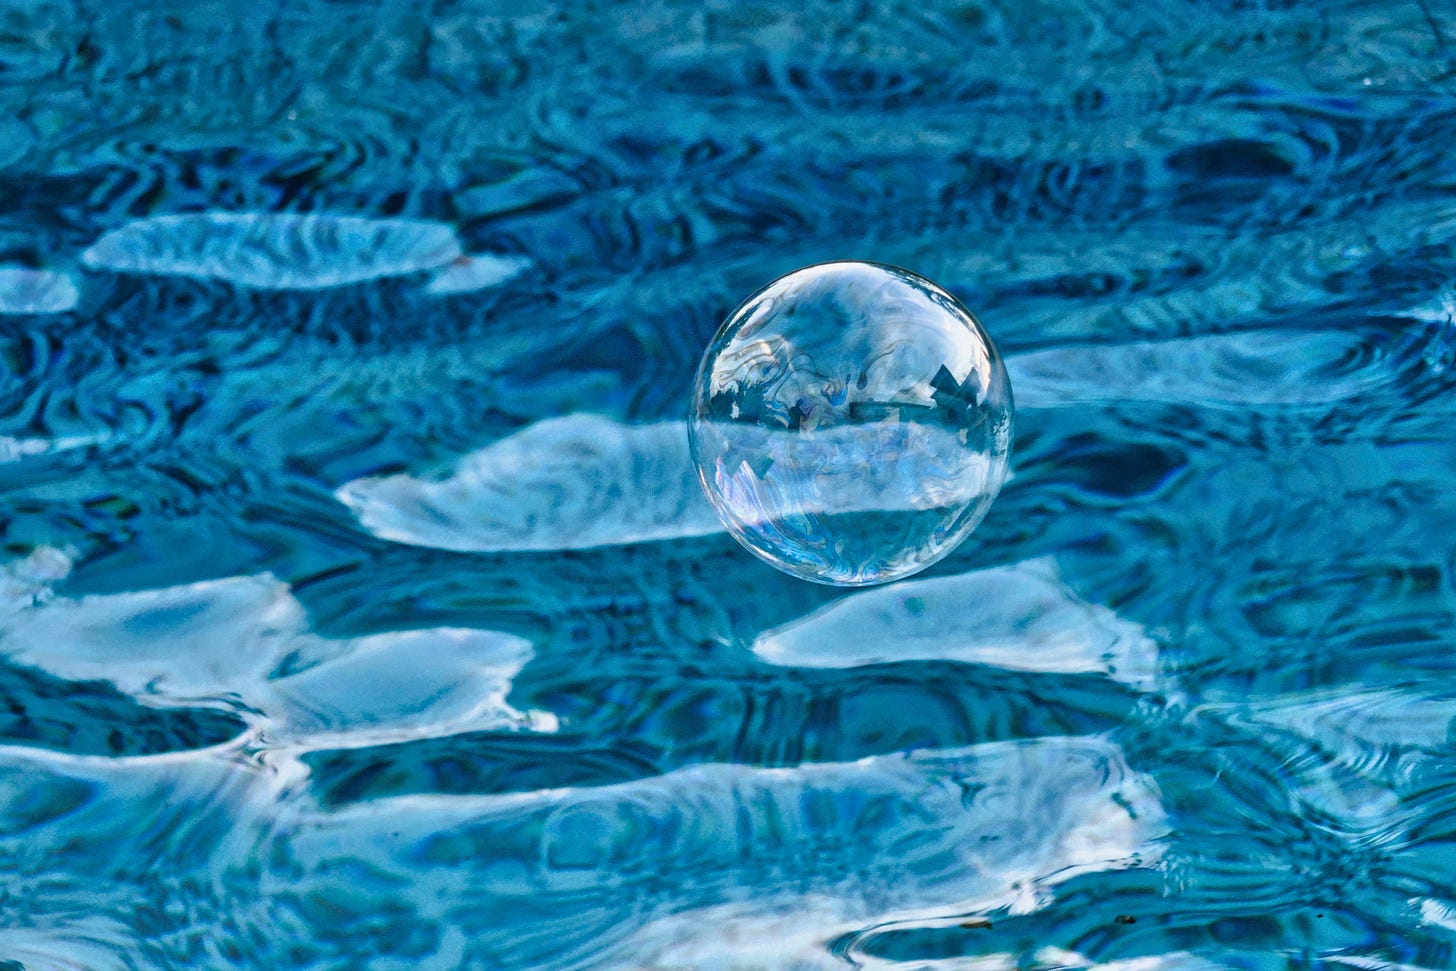 A soap bubble floats above the water in the pool; the reflection of the sun creates a bright blue background